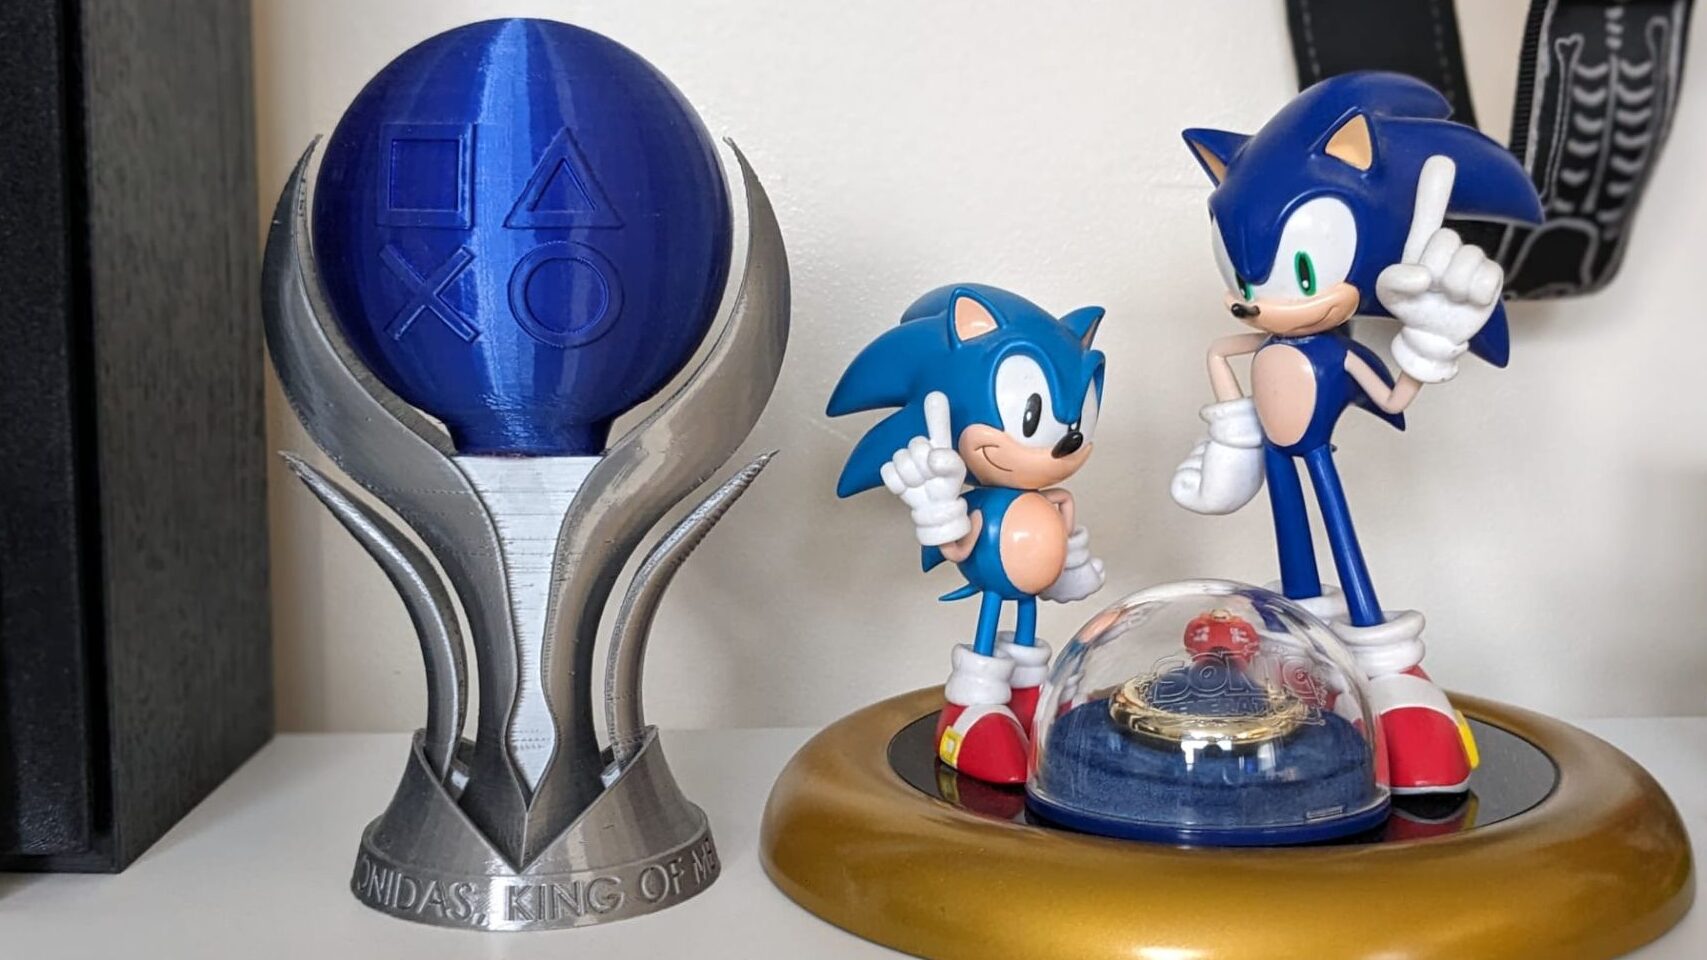 A PLATINUM TROPHY STATUE NEXT TO A STATUE OF SONIC